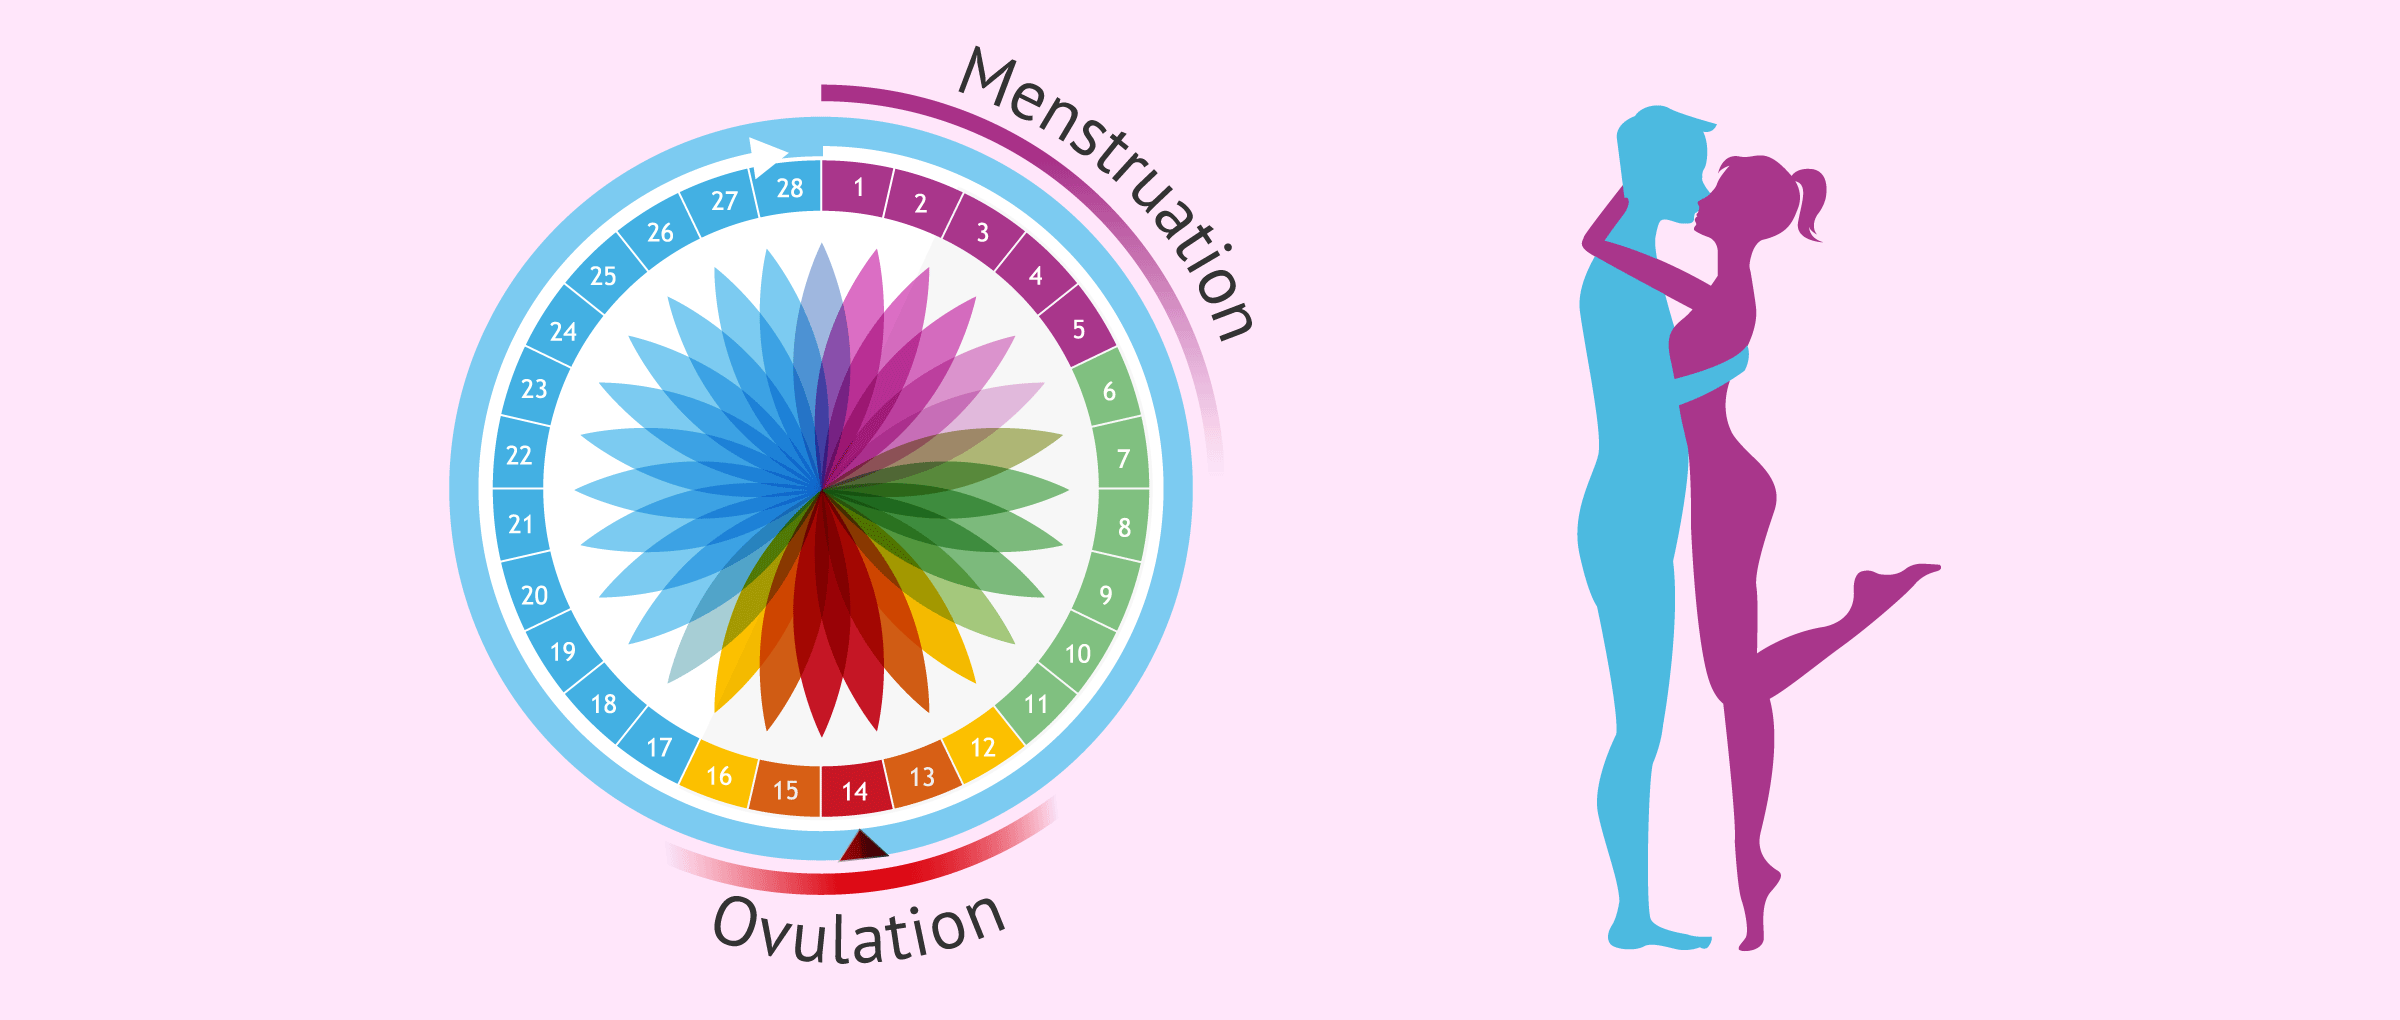 Timed intercourse at the time of ovulation